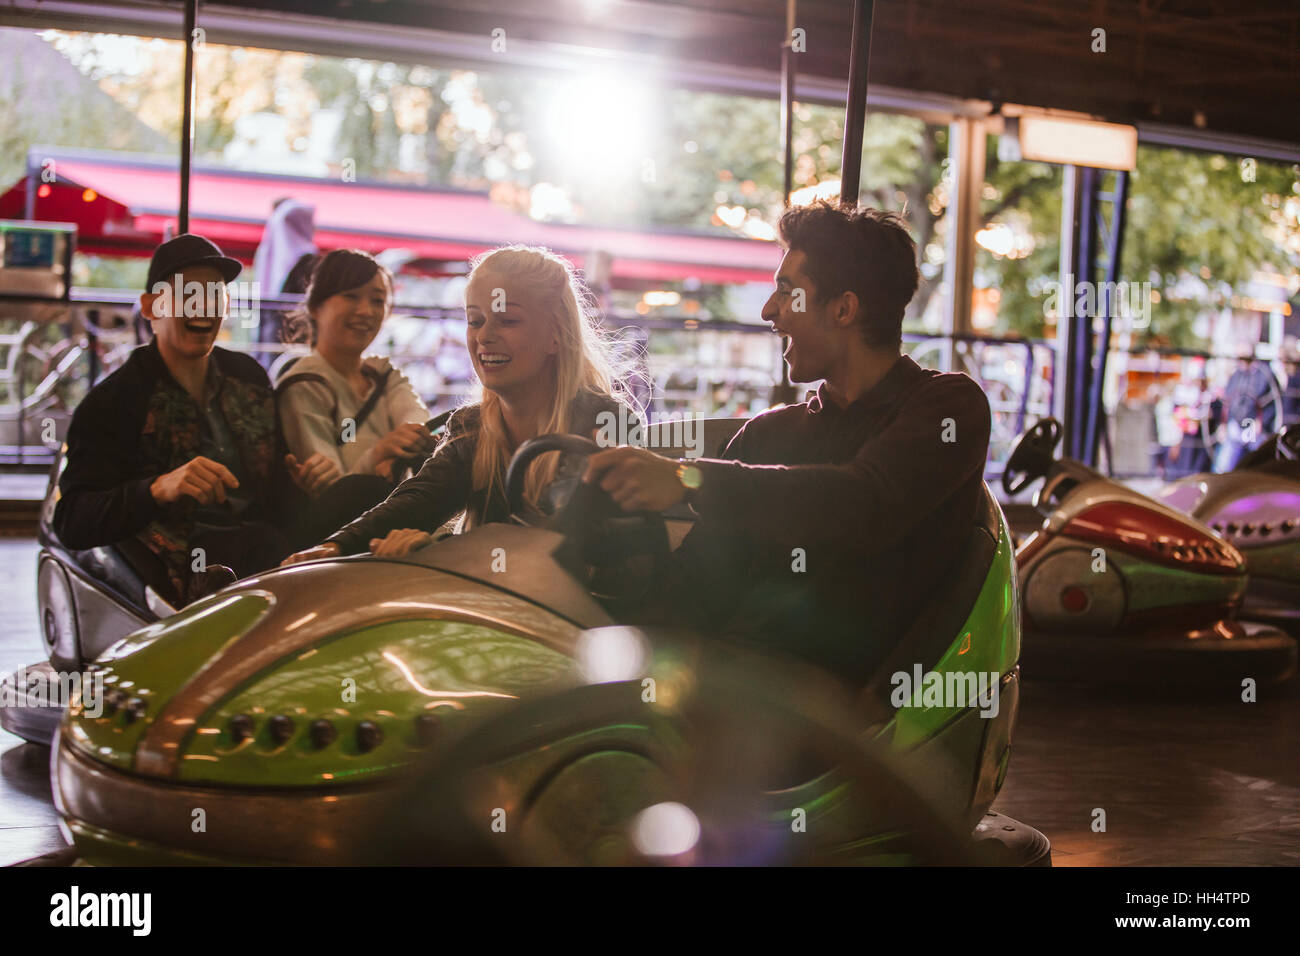 Group of friends having fun on bumper car ride in amusement park. Young man and woman having fun with bumper cars. Stock Photo